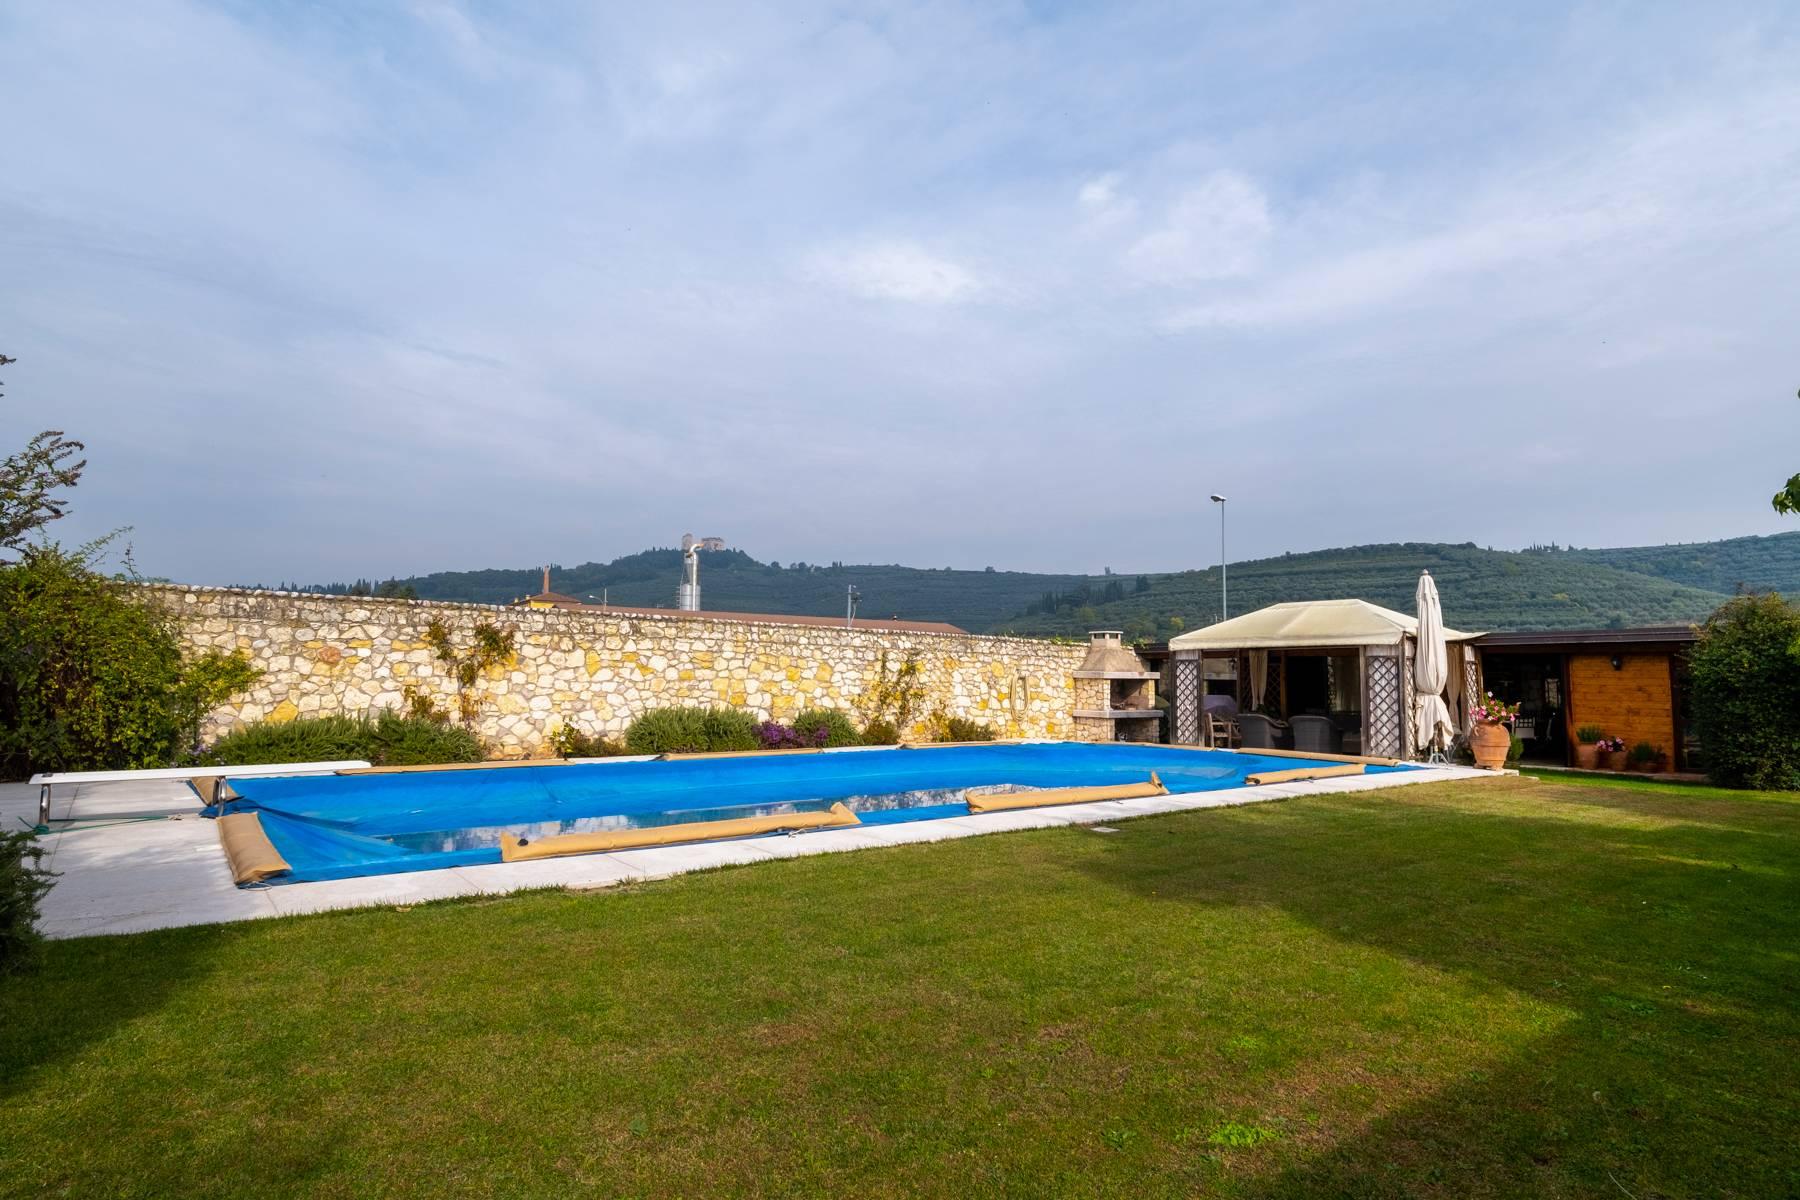 Stunning farmhouse surrounded by vineyards in the Valpolicella area - 4